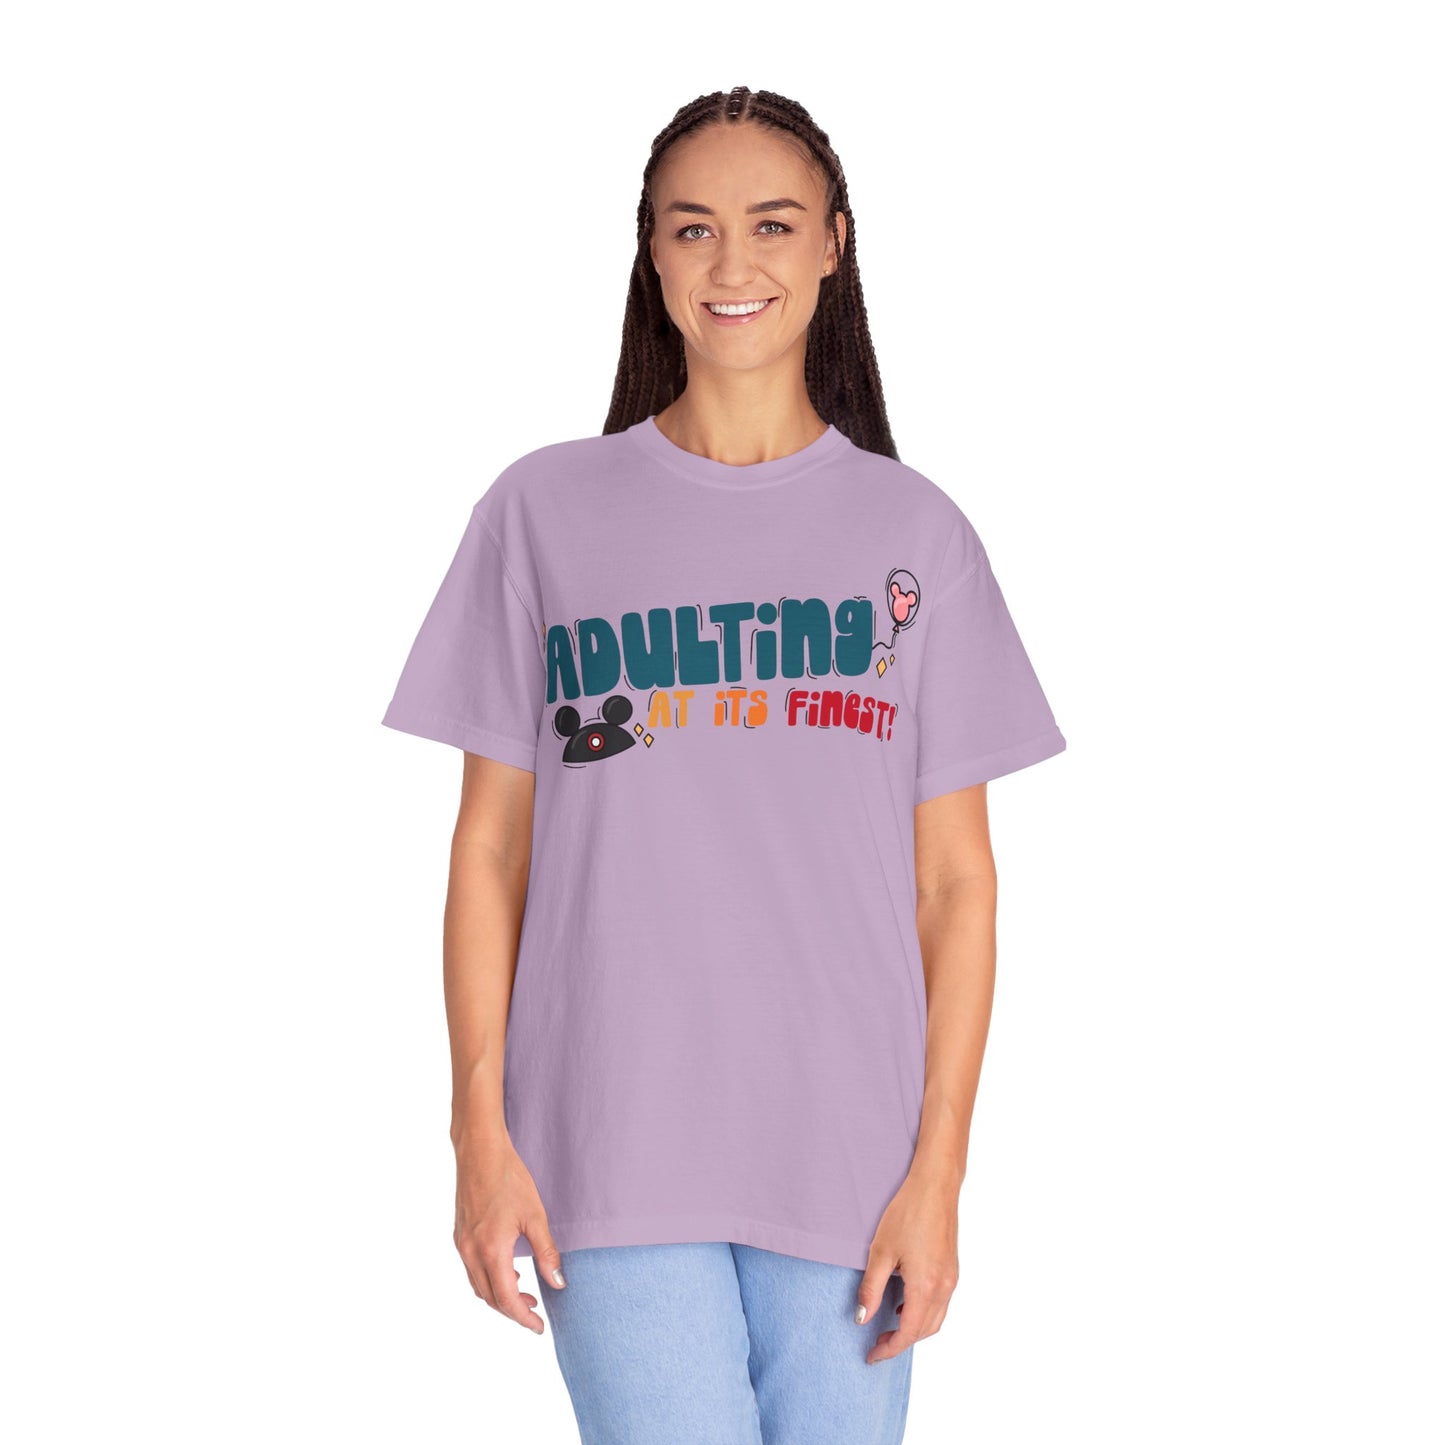 Adult Adulting at its Finest/Teal, orange, yellow, red Comfort Colors Tee